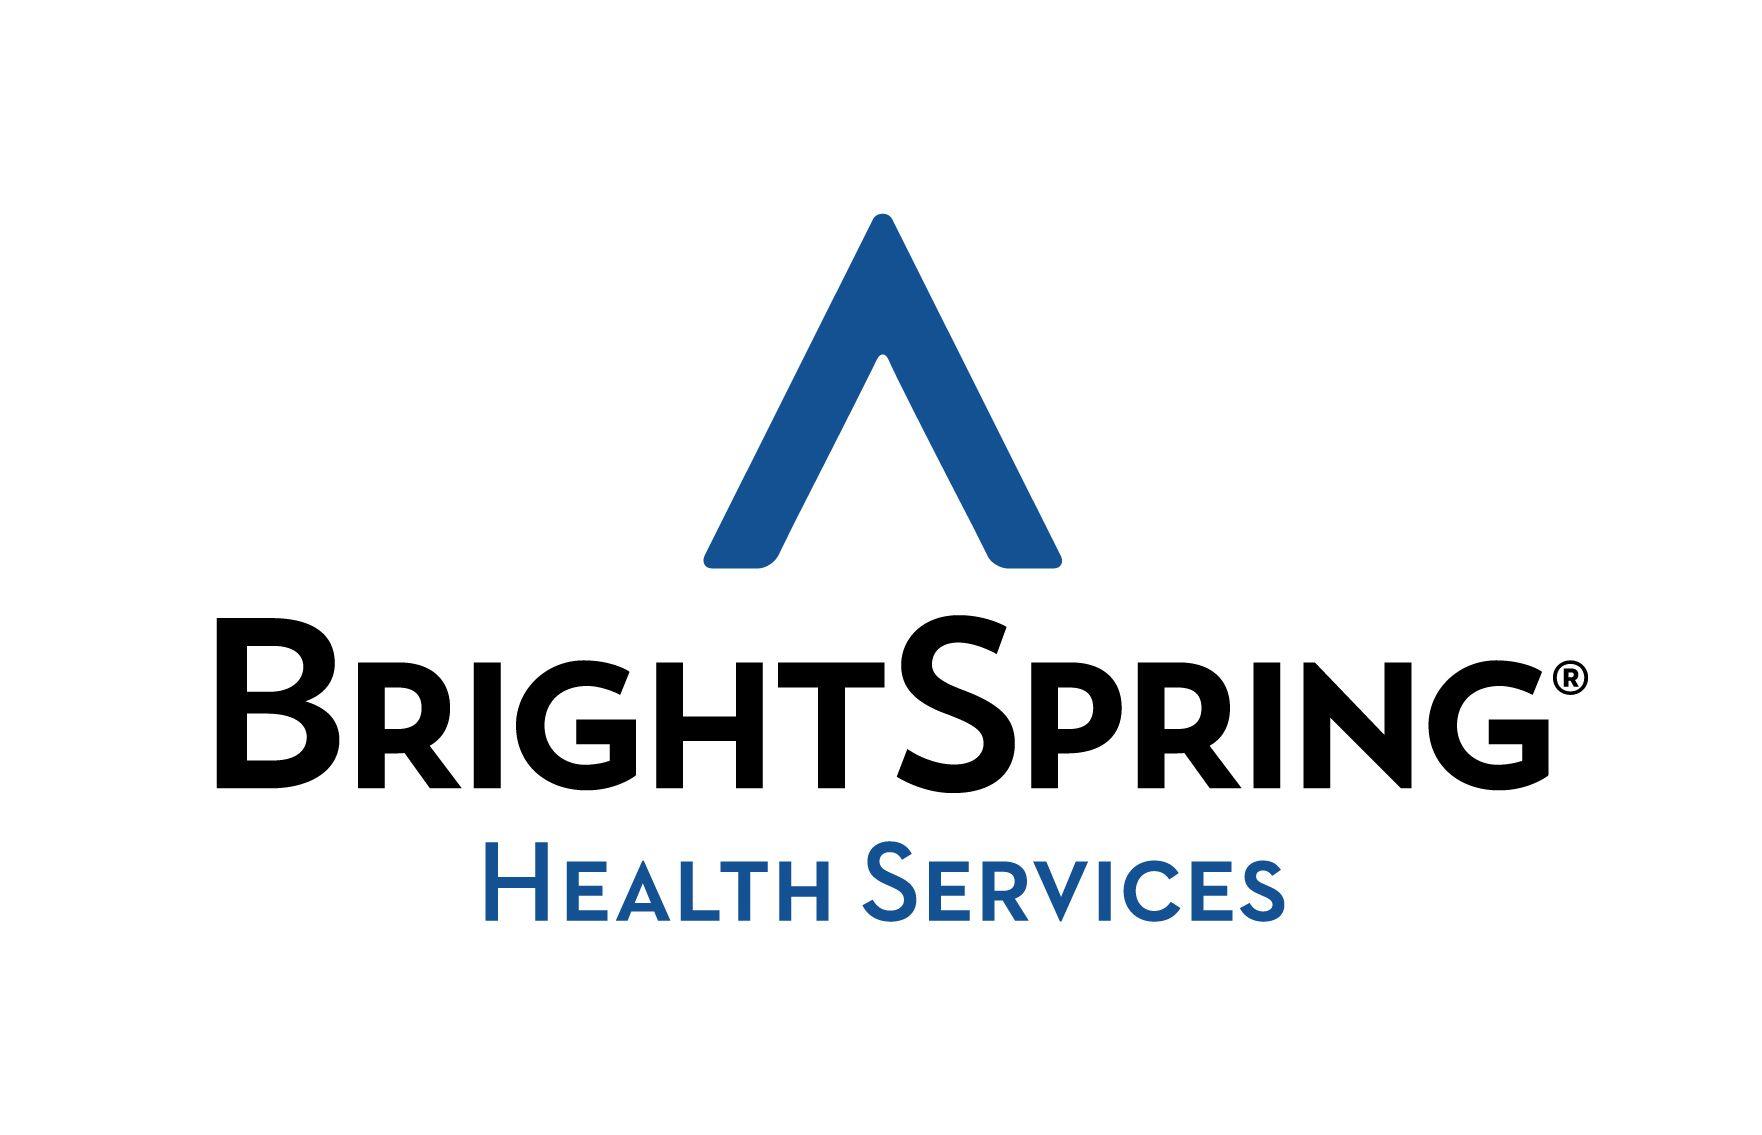 Baker Triangle Logo - BrightSpring and PharMerica Combine to Form Comprehensive Health